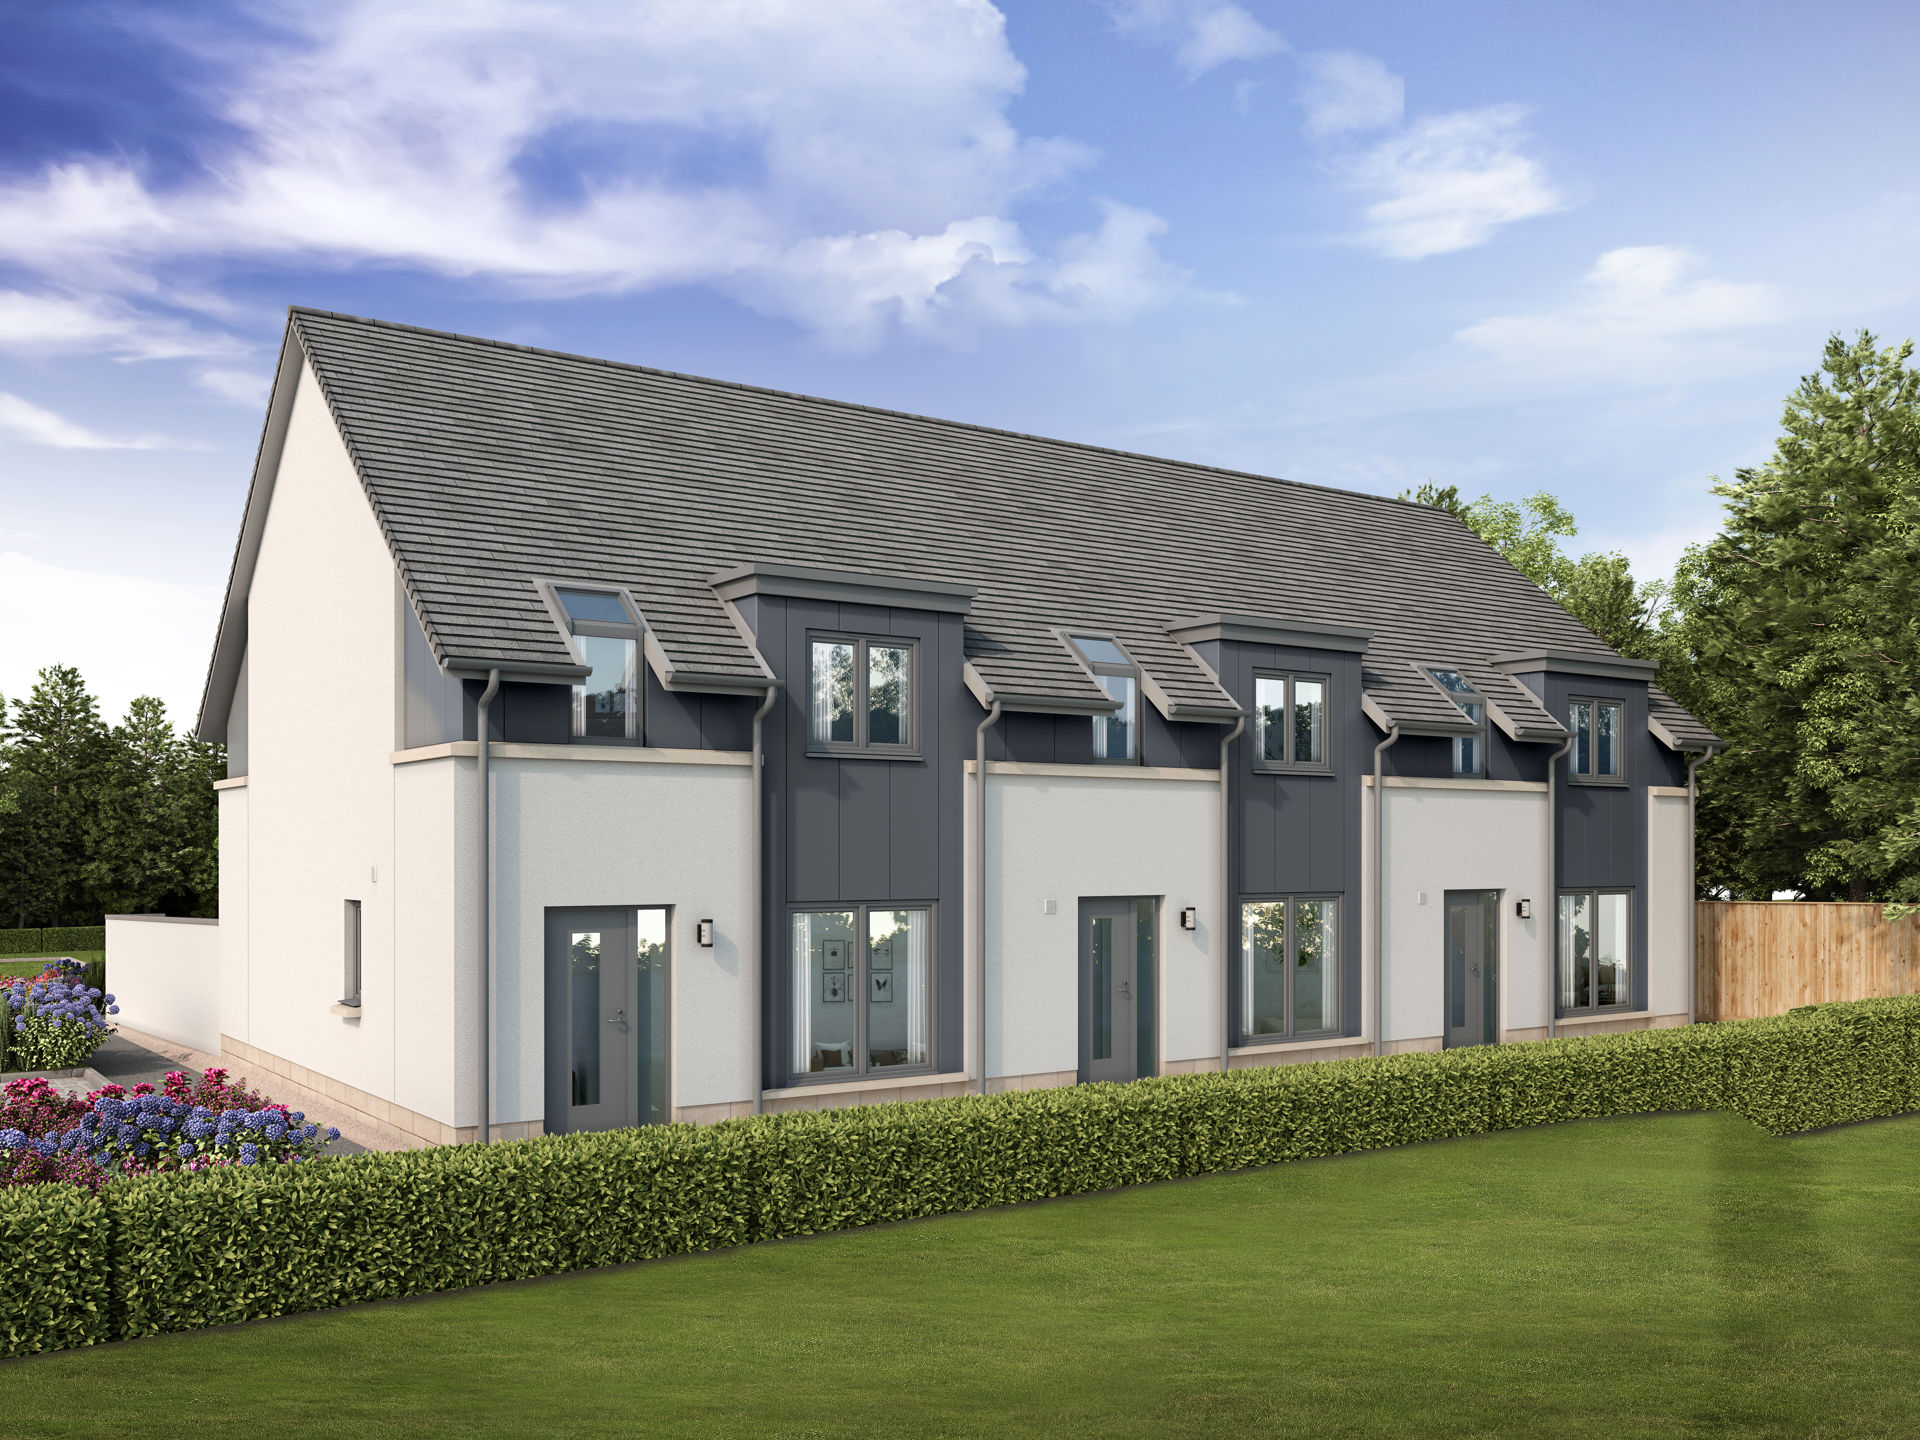 The Orchard Collection|Three delightful cottages set within mature woodlands within vast green space.